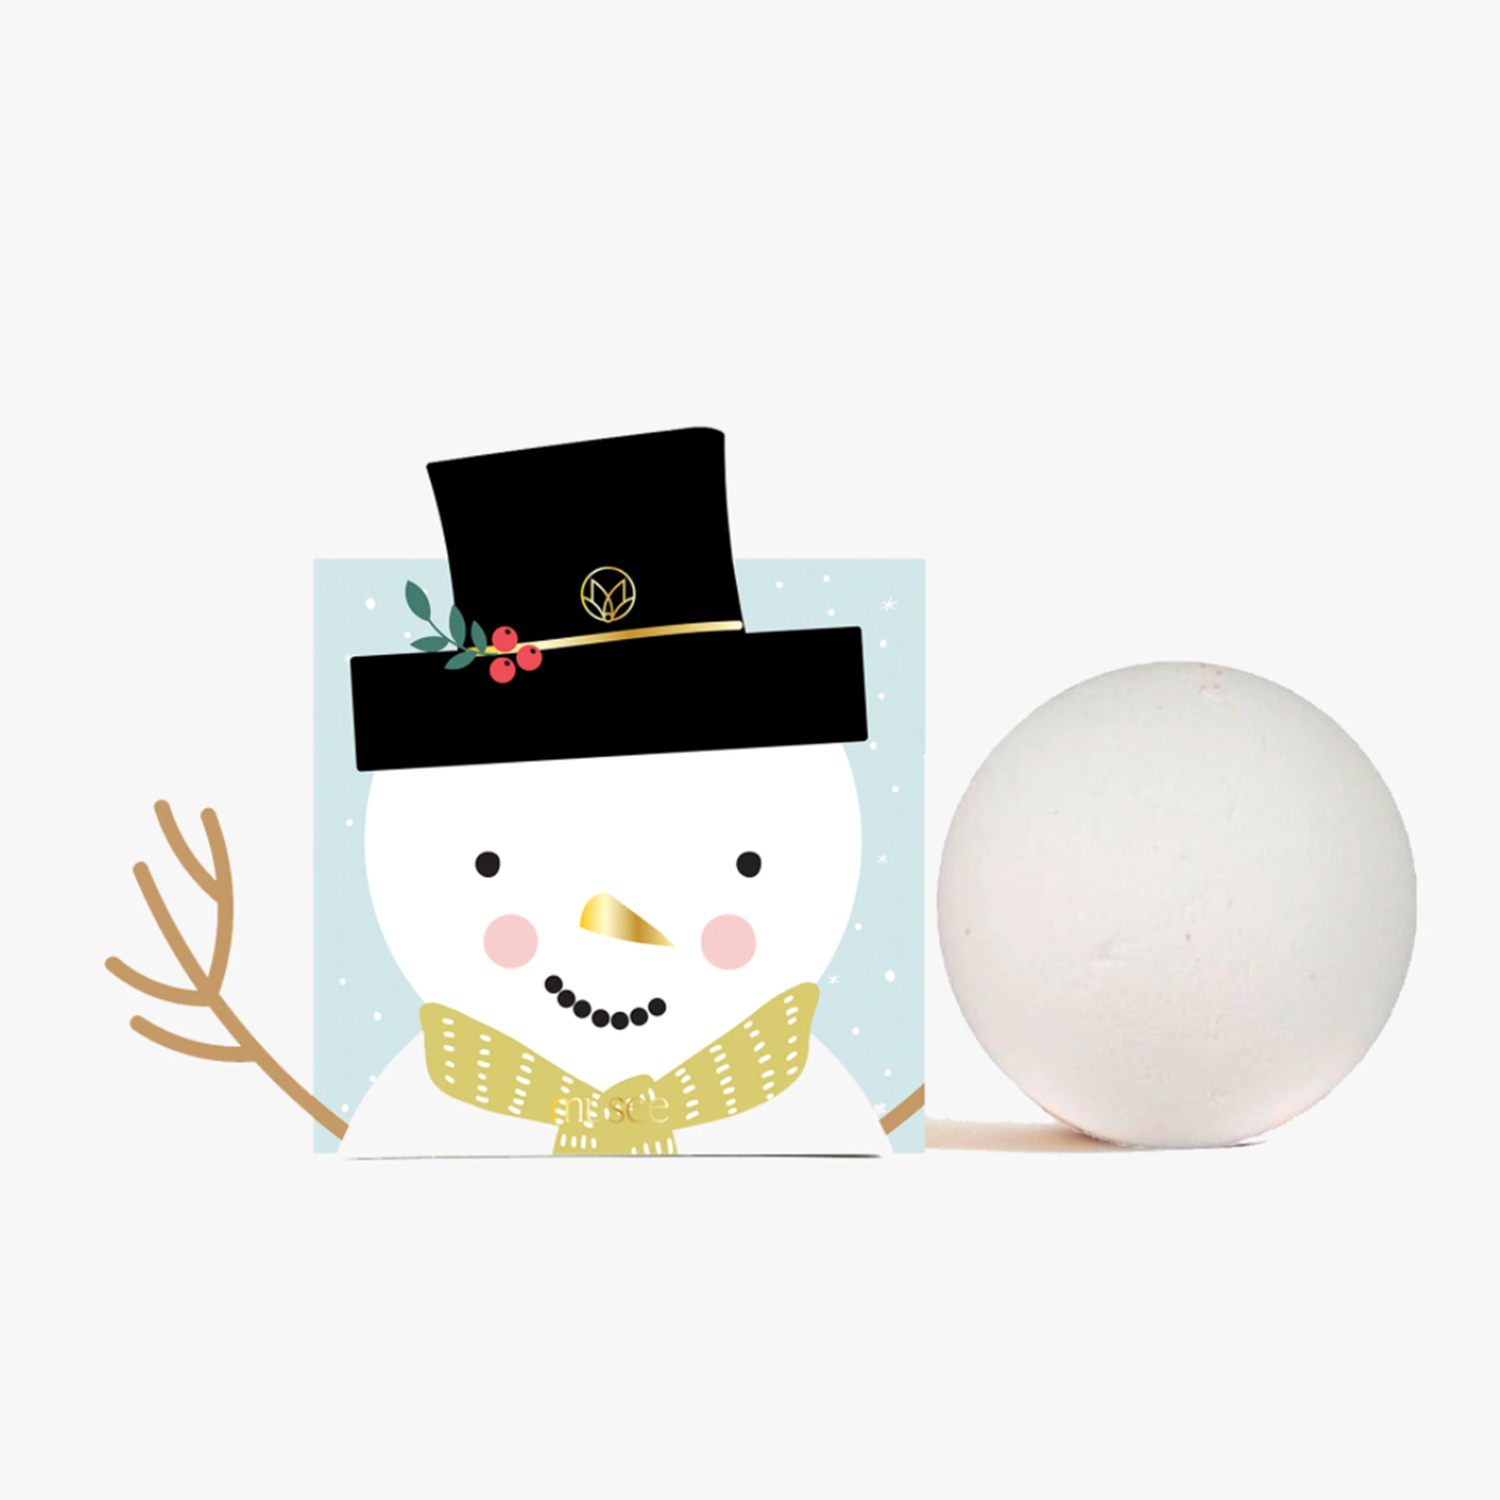 Frosty the Snowman Bath Balm. Celebrate the season with Frosty the Snowman! This sugar cookie scented bath balm will nourish your skin with jojoba oil and vanilla essential oil while you relax in a milky white and festive green colored bath!